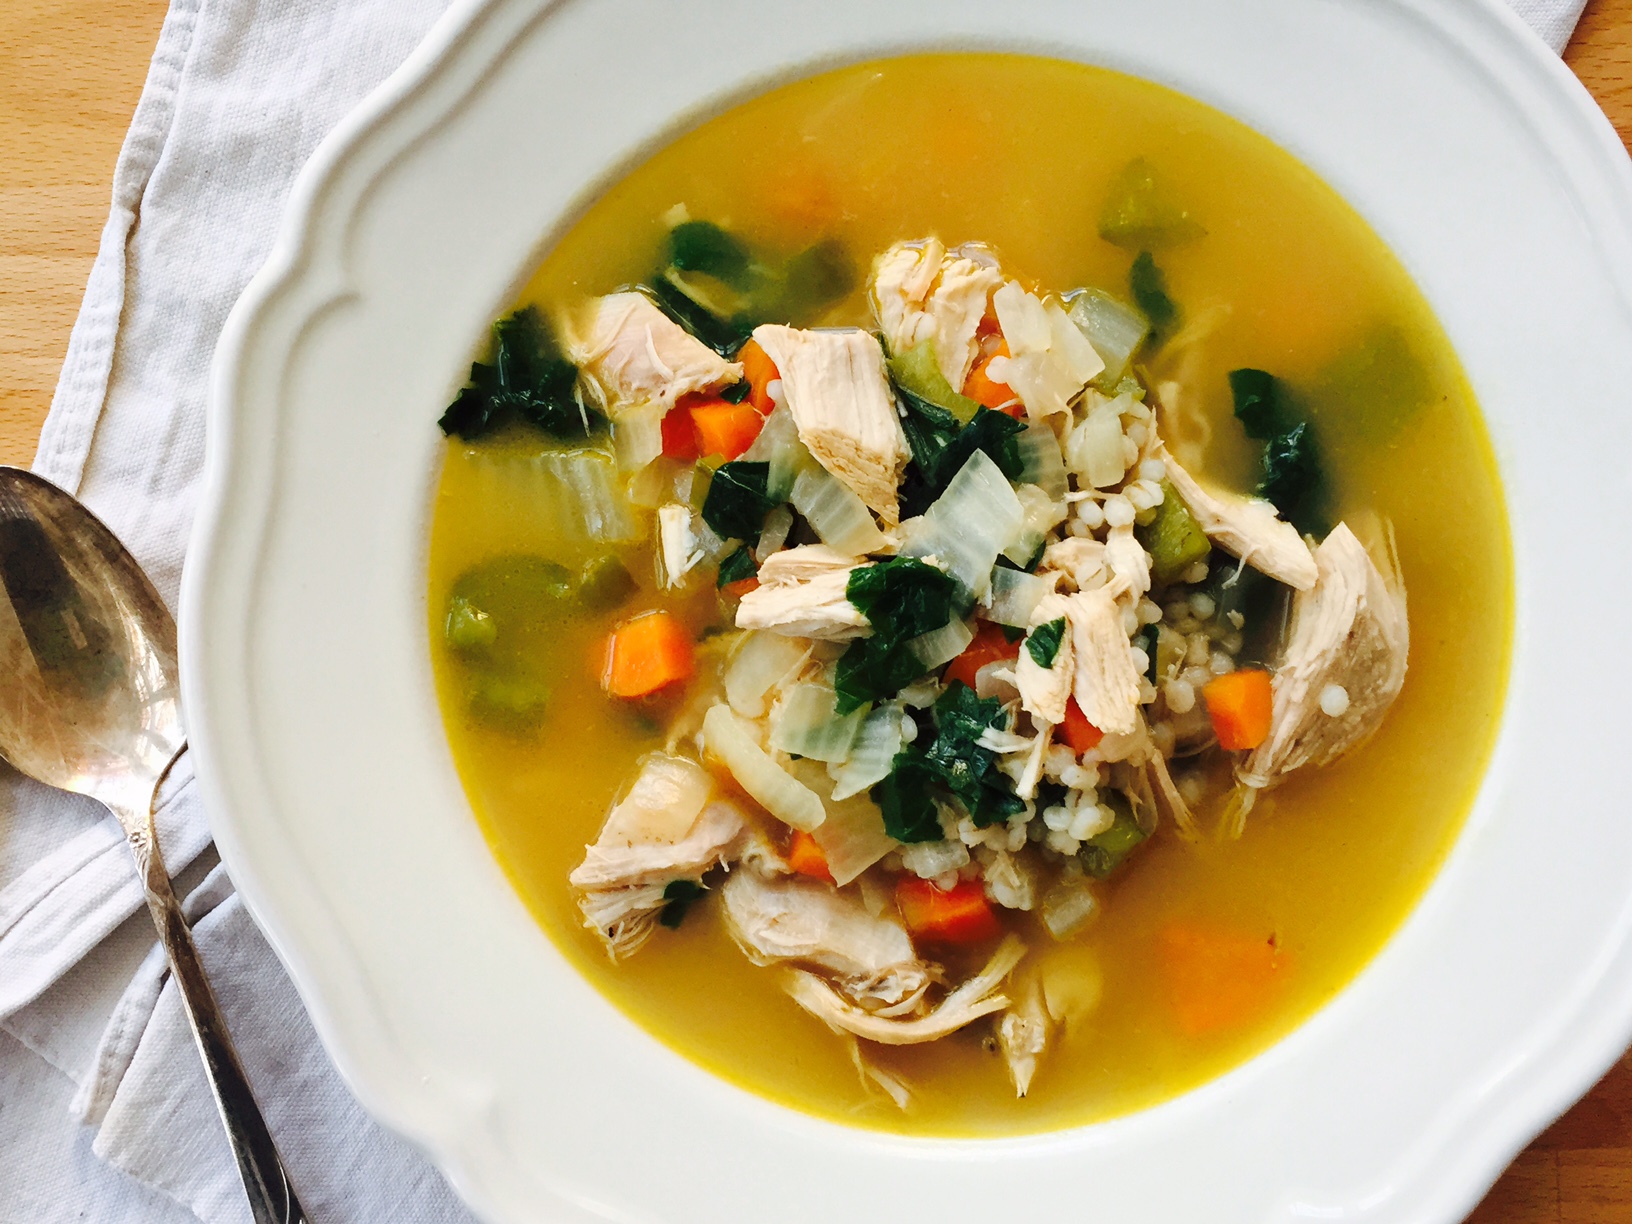 Chicken & Barley Soup with Greens – The Best of Bridge